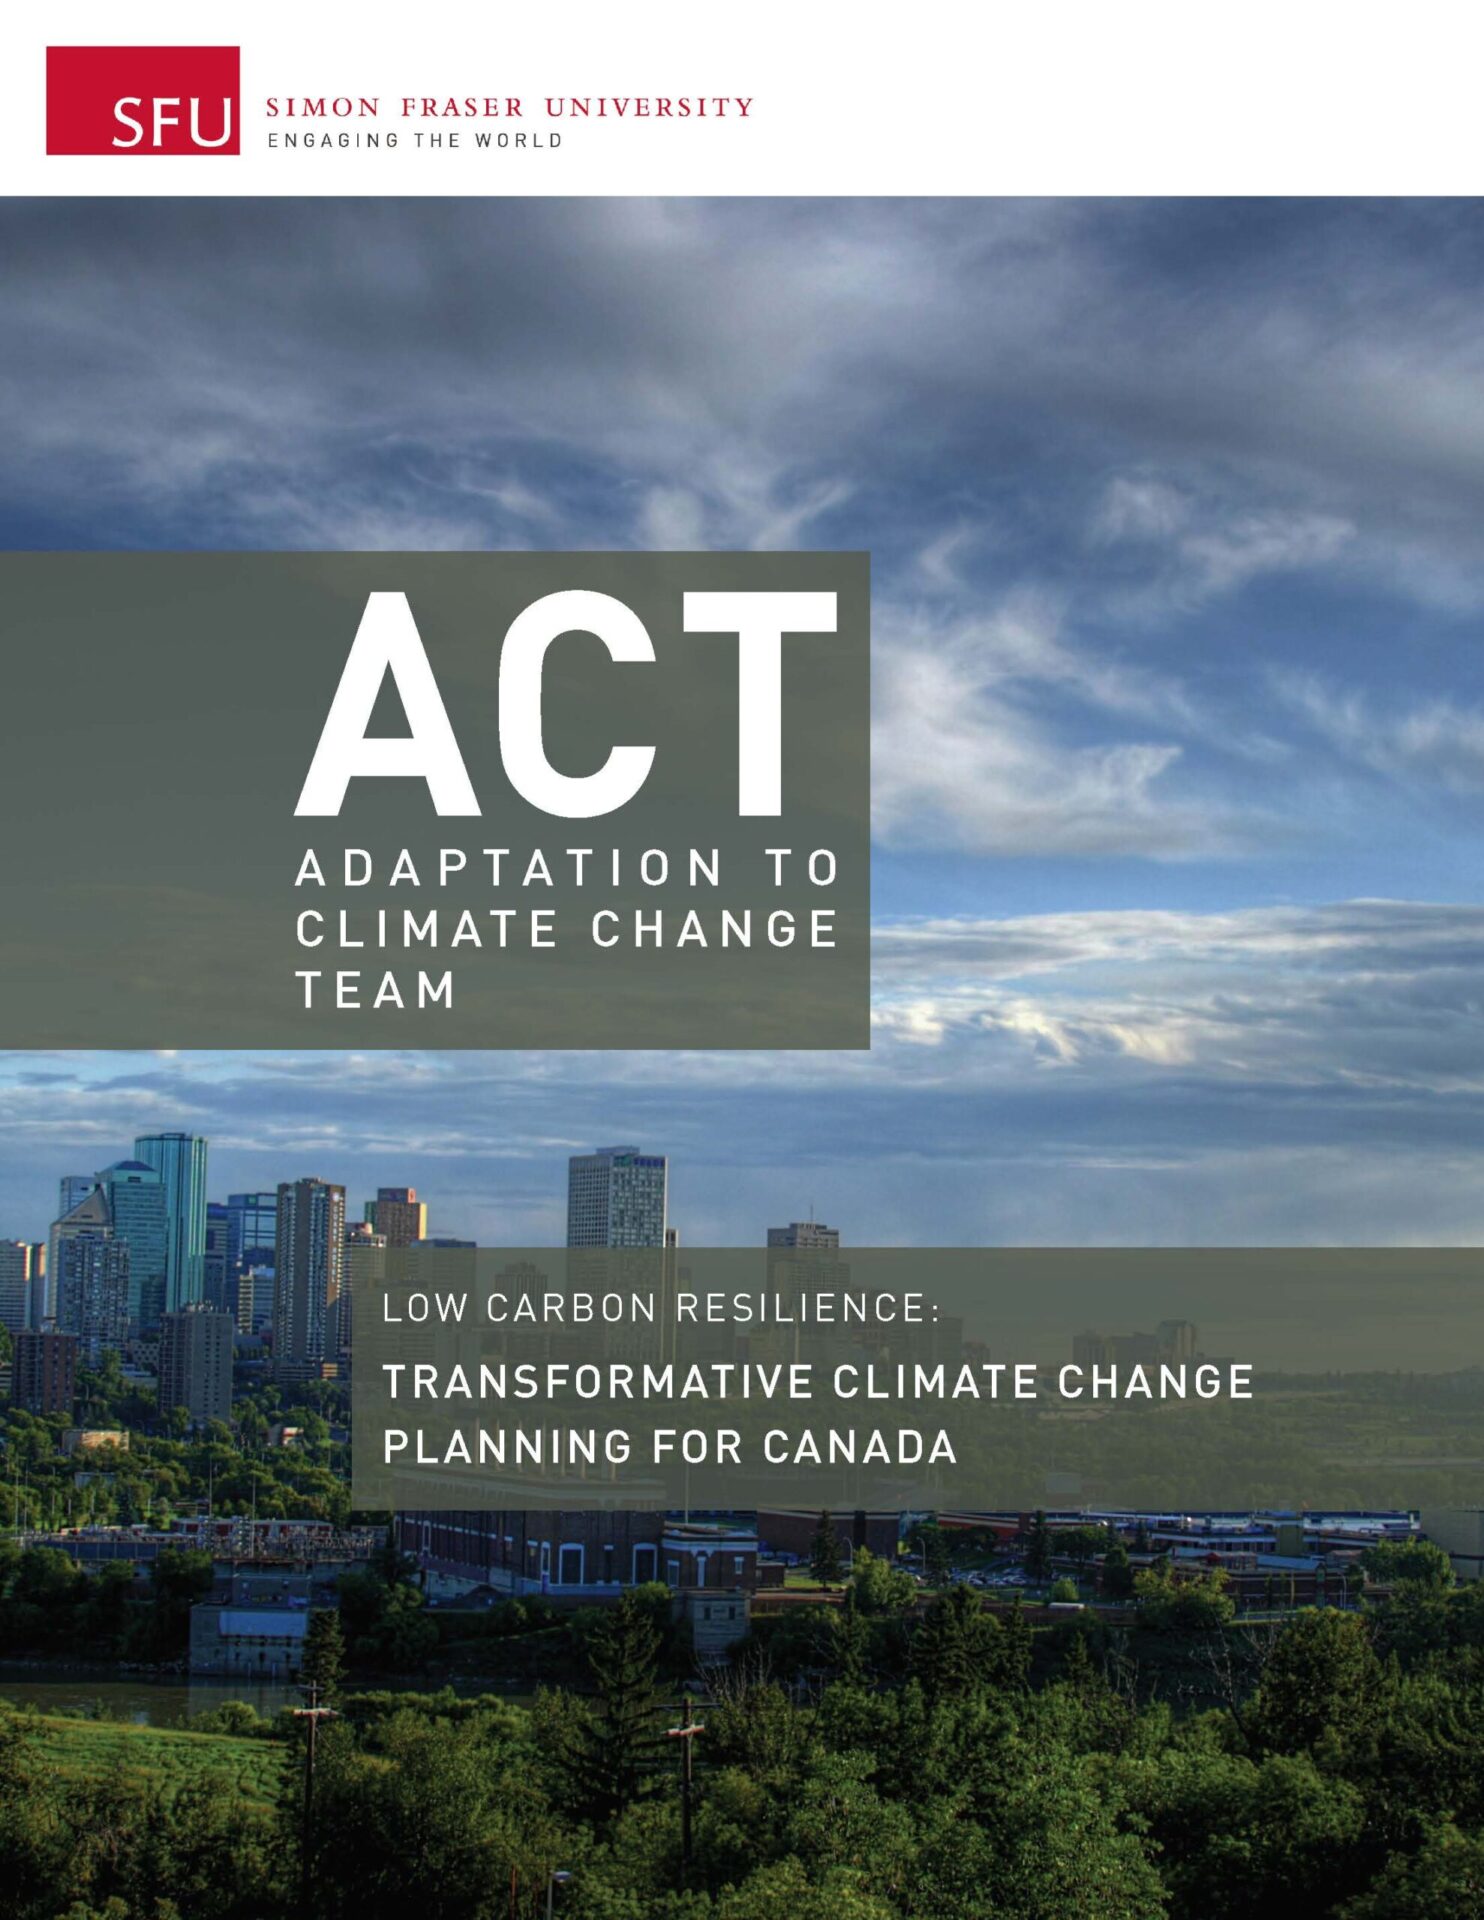 Low Carbon Resilience: Transformative Climate Change Planning for Canada